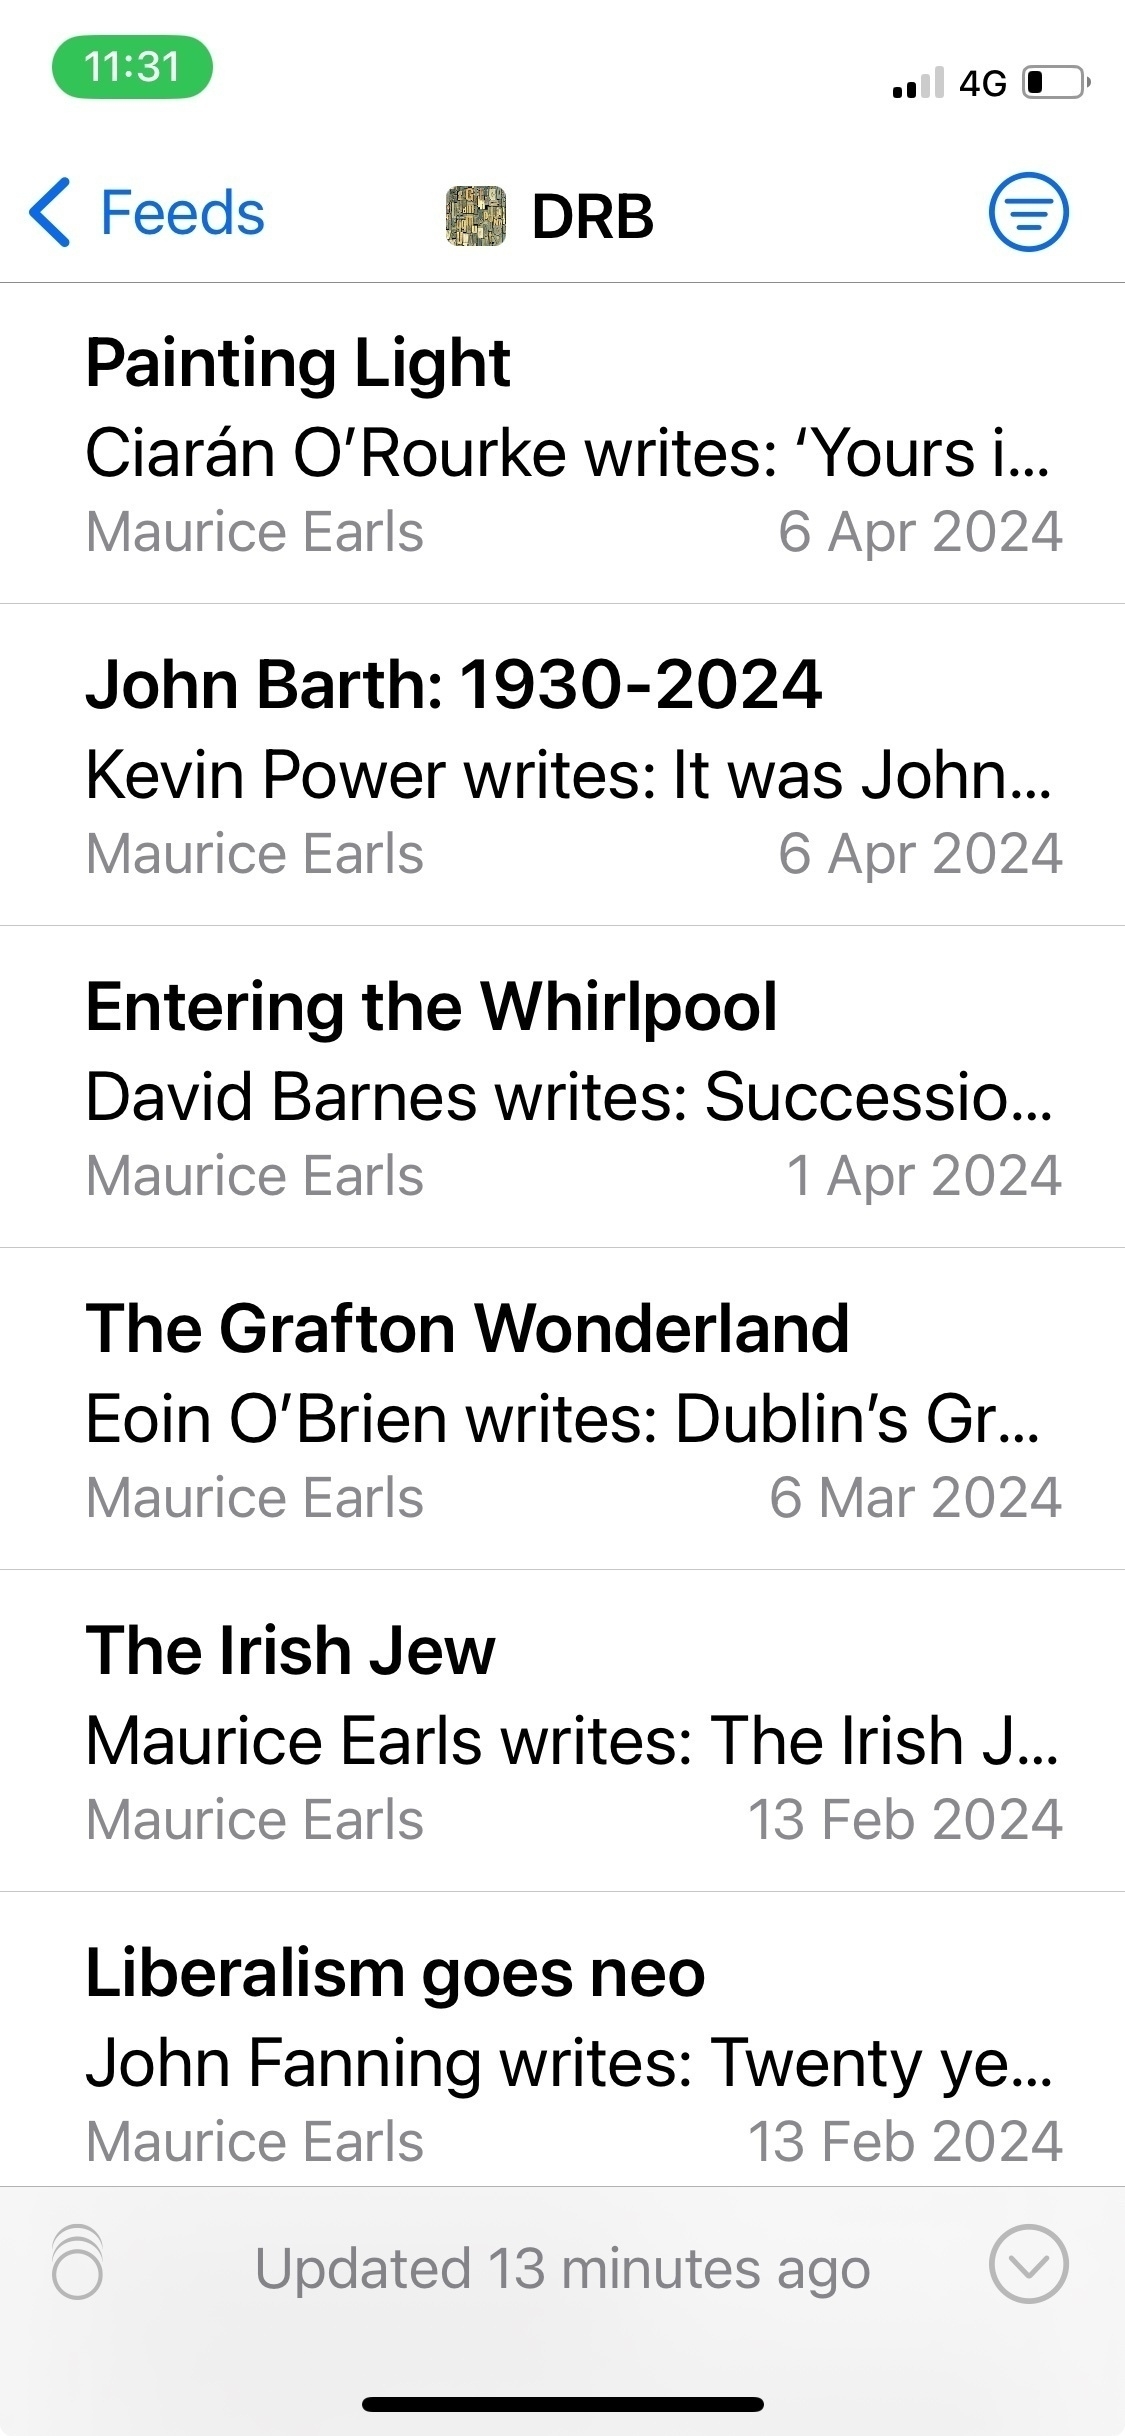 List of recent articles from the DRB.ie feed dated respectively 6 Apr 2024, 6 Apr 2024, 1 Apr 2024, 6 Mar 2024, 13 Feb 2024, 13 Feb 2024